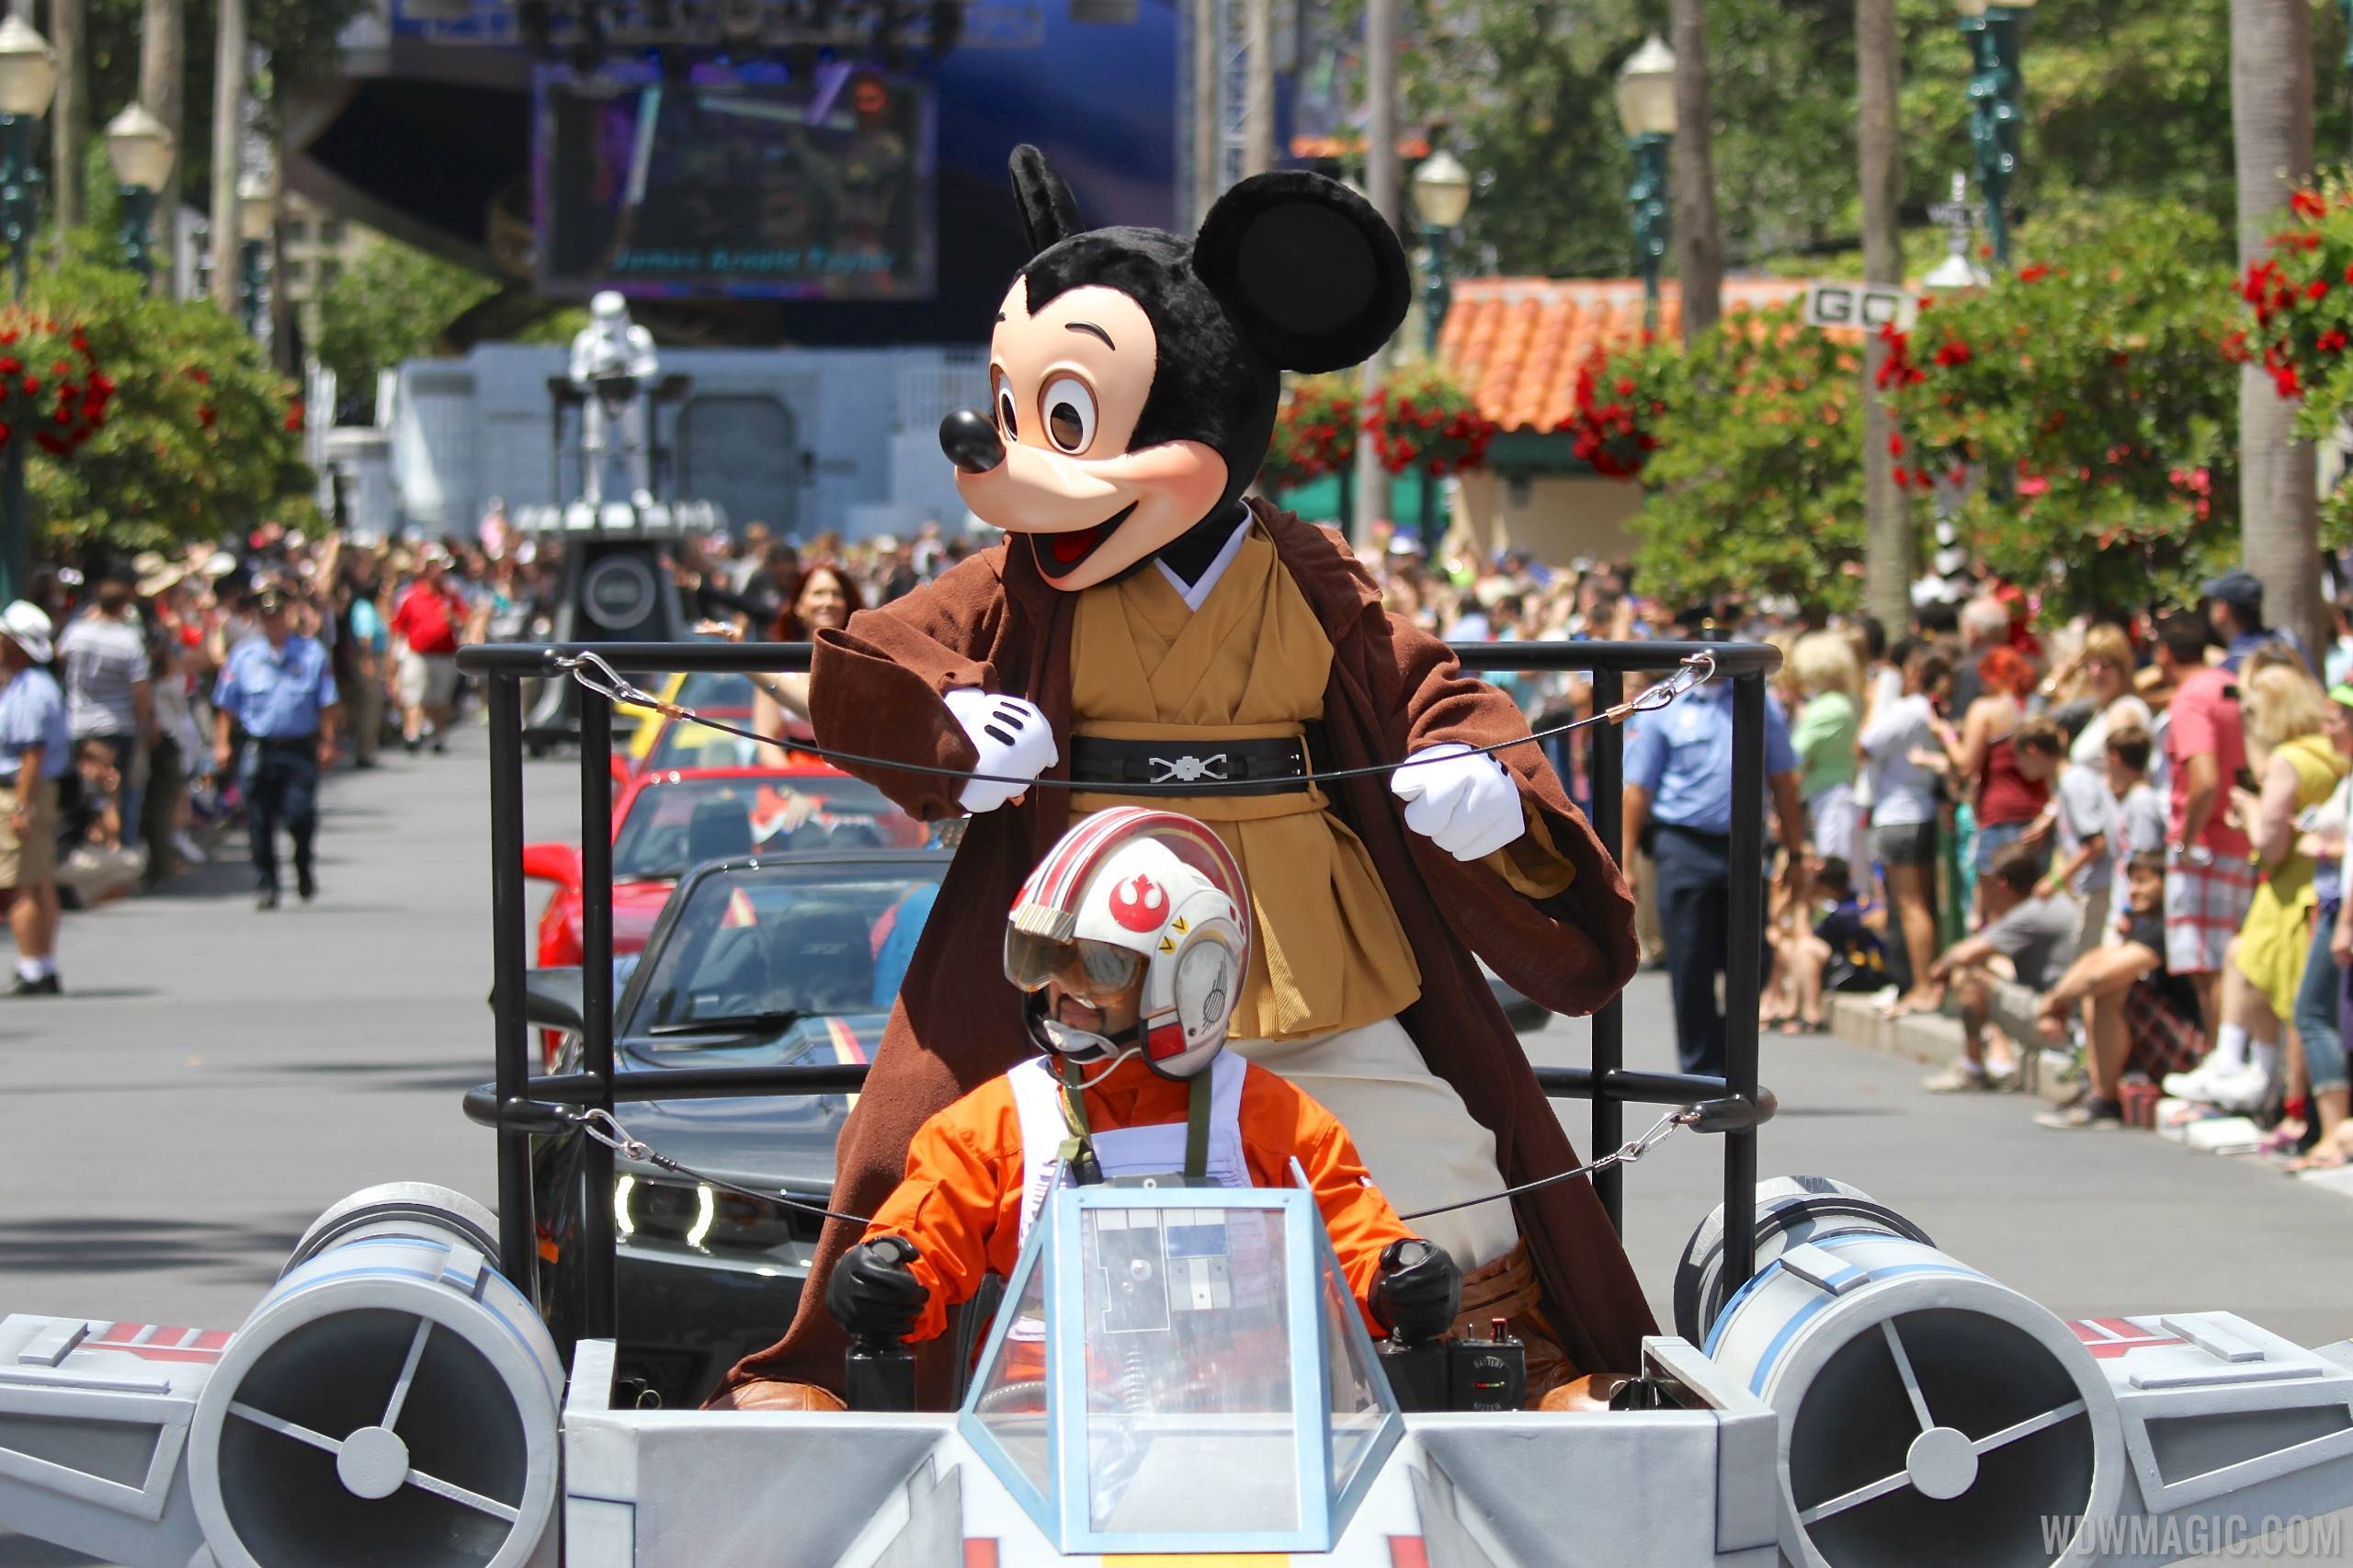 PHOTOS - 2014 Star Wars Weekends 1 Legends of the Force Motorcade celebrity guests